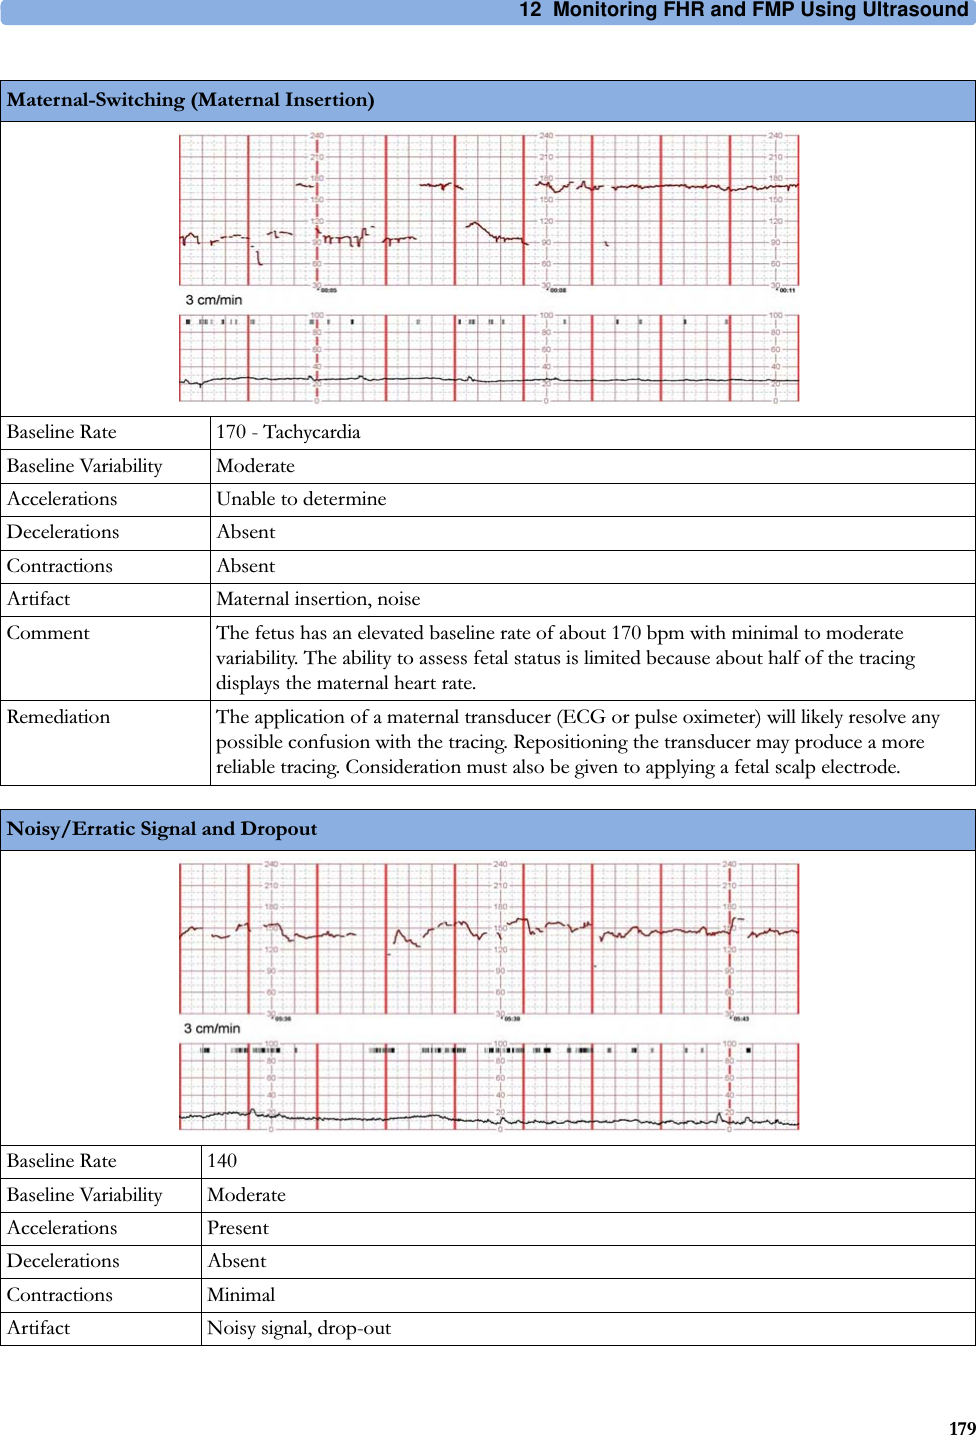 12  Monitoring FHR and FMP Using Ultrasound179Maternal-Switching (Maternal Insertion)Baseline Rate 170 - TachycardiaBaseline Variability ModerateAccelerations Unable to determineDecelerations AbsentContractions AbsentArtifact Maternal insertion, noiseComment The fetus has an elevated baseline rate of about 170 bpm with minimal to moderate variability. The ability to assess fetal status is limited because about half of the tracing displays the maternal heart rate.Remediation The application of a maternal transducer (ECG or pulse oximeter) will likely resolve any possible confusion with the tracing. Repositioning the transducer may produce a more reliable tracing. Consideration must also be given to applying a fetal scalp electrode.Noisy/Erratic Signal and DropoutBaseline Rate 140Baseline Variability ModerateAccelerations PresentDecelerations AbsentContractions MinimalArtifact Noisy signal, drop-out